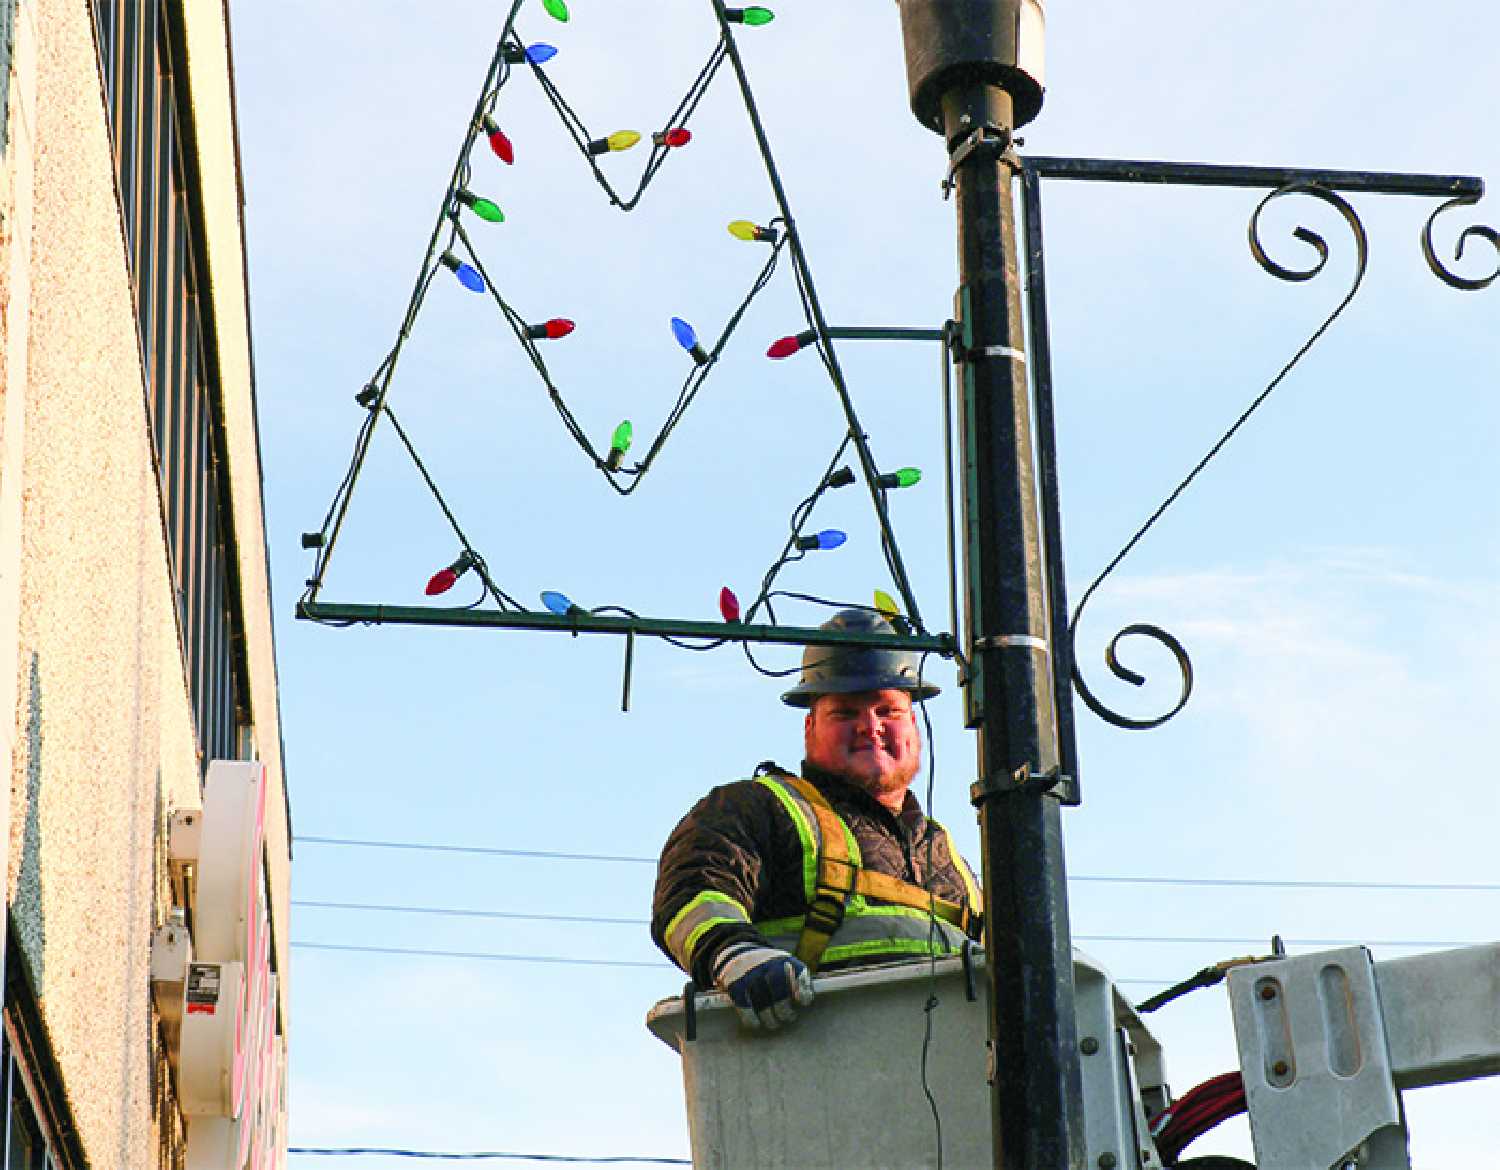 Daniel Miskiman with the Moosomin town crew was helping to hang up Christmas decorations in Moosomin last week for the Christmas season